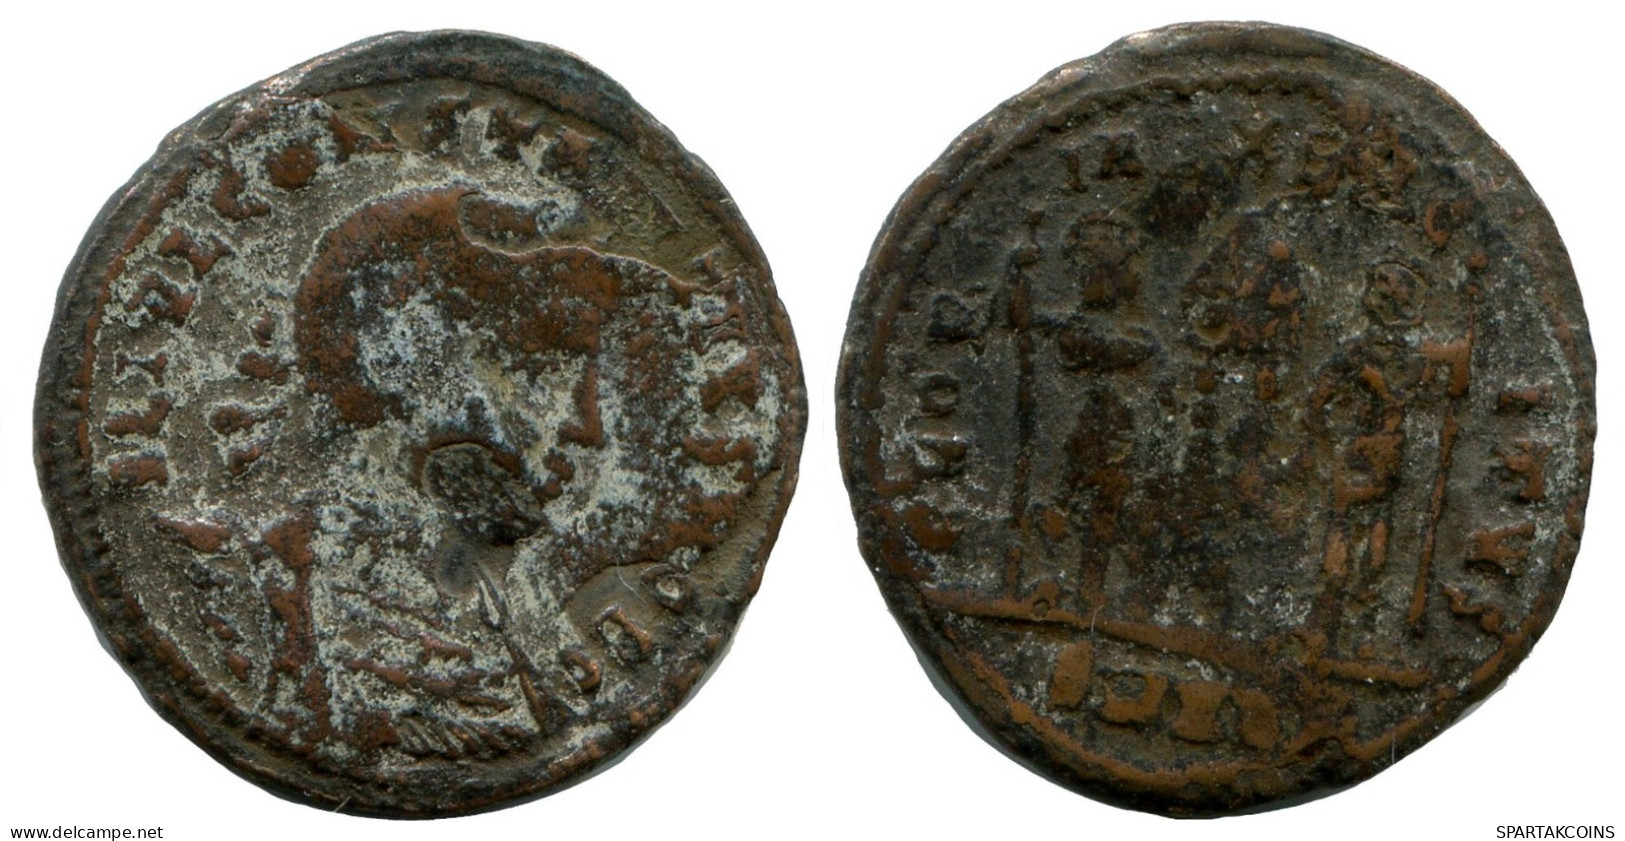 CONSTANTIUS II MINTED IN ALEKSANDRIA FOUND IN IHNASYAH HOARD #ANC10481.14.D.A - The Christian Empire (307 AD To 363 AD)